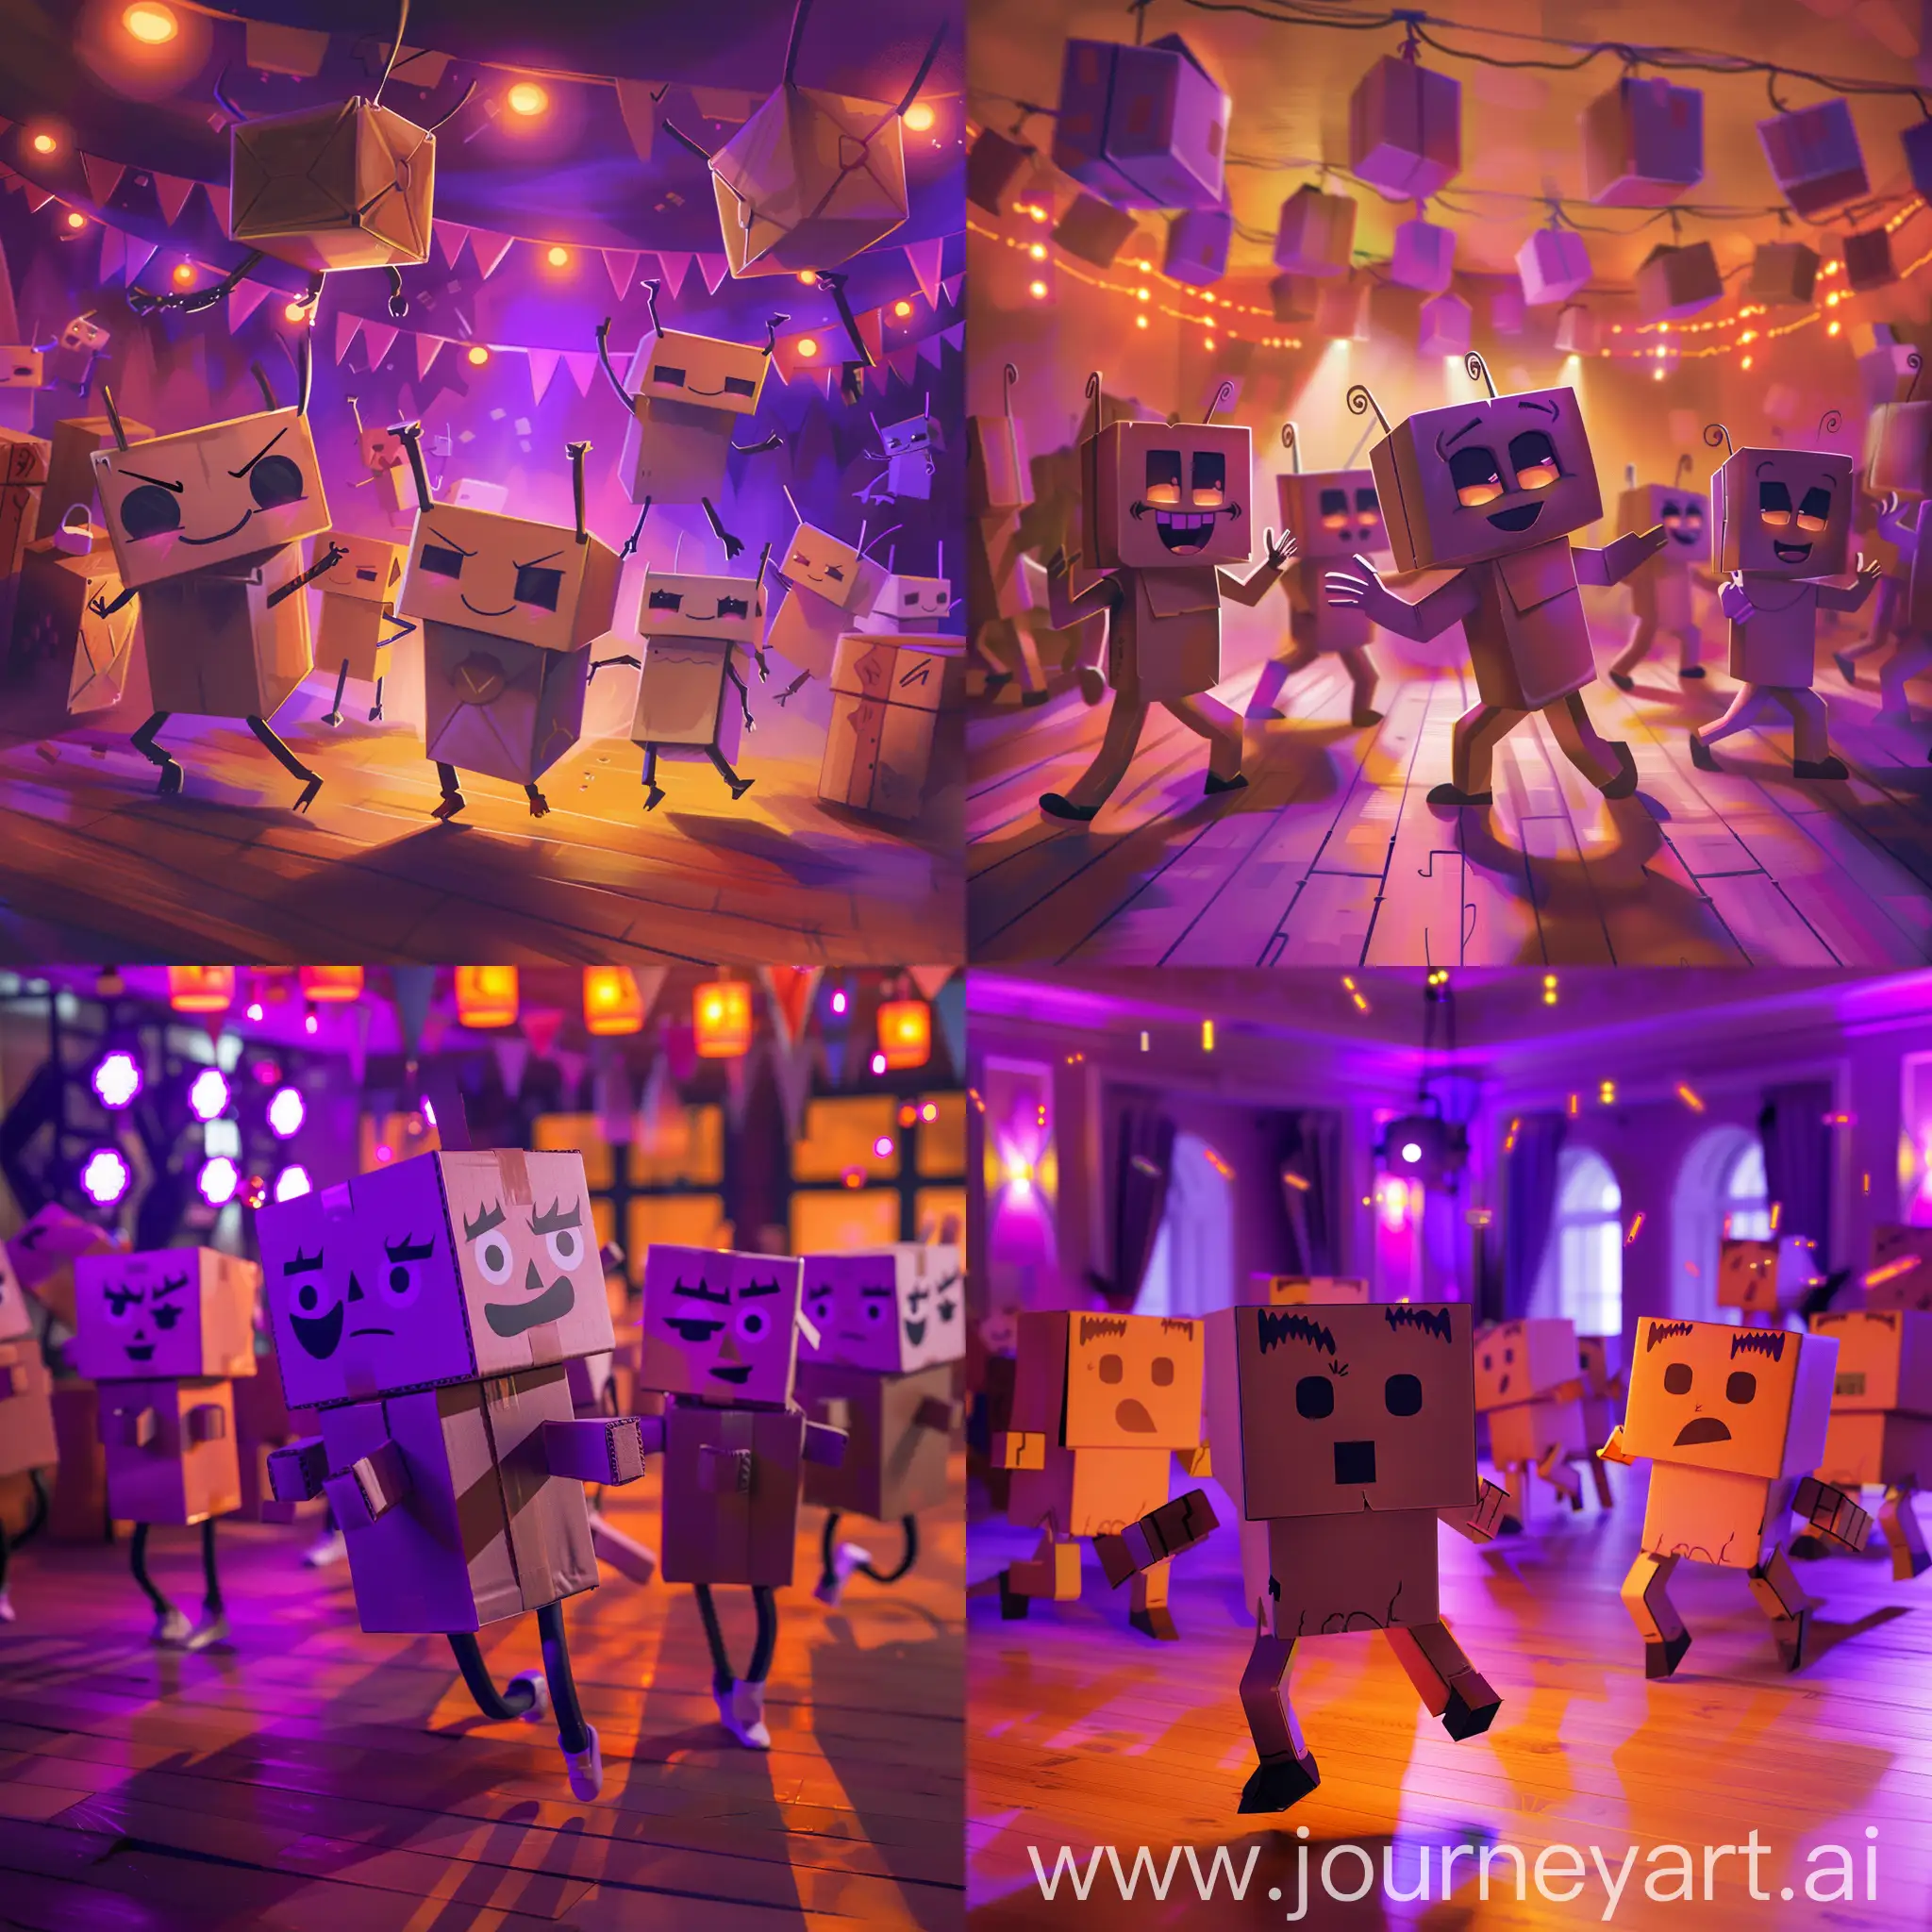 Cardboard-Package-Party-with-Purple-and-Orange-Lighting